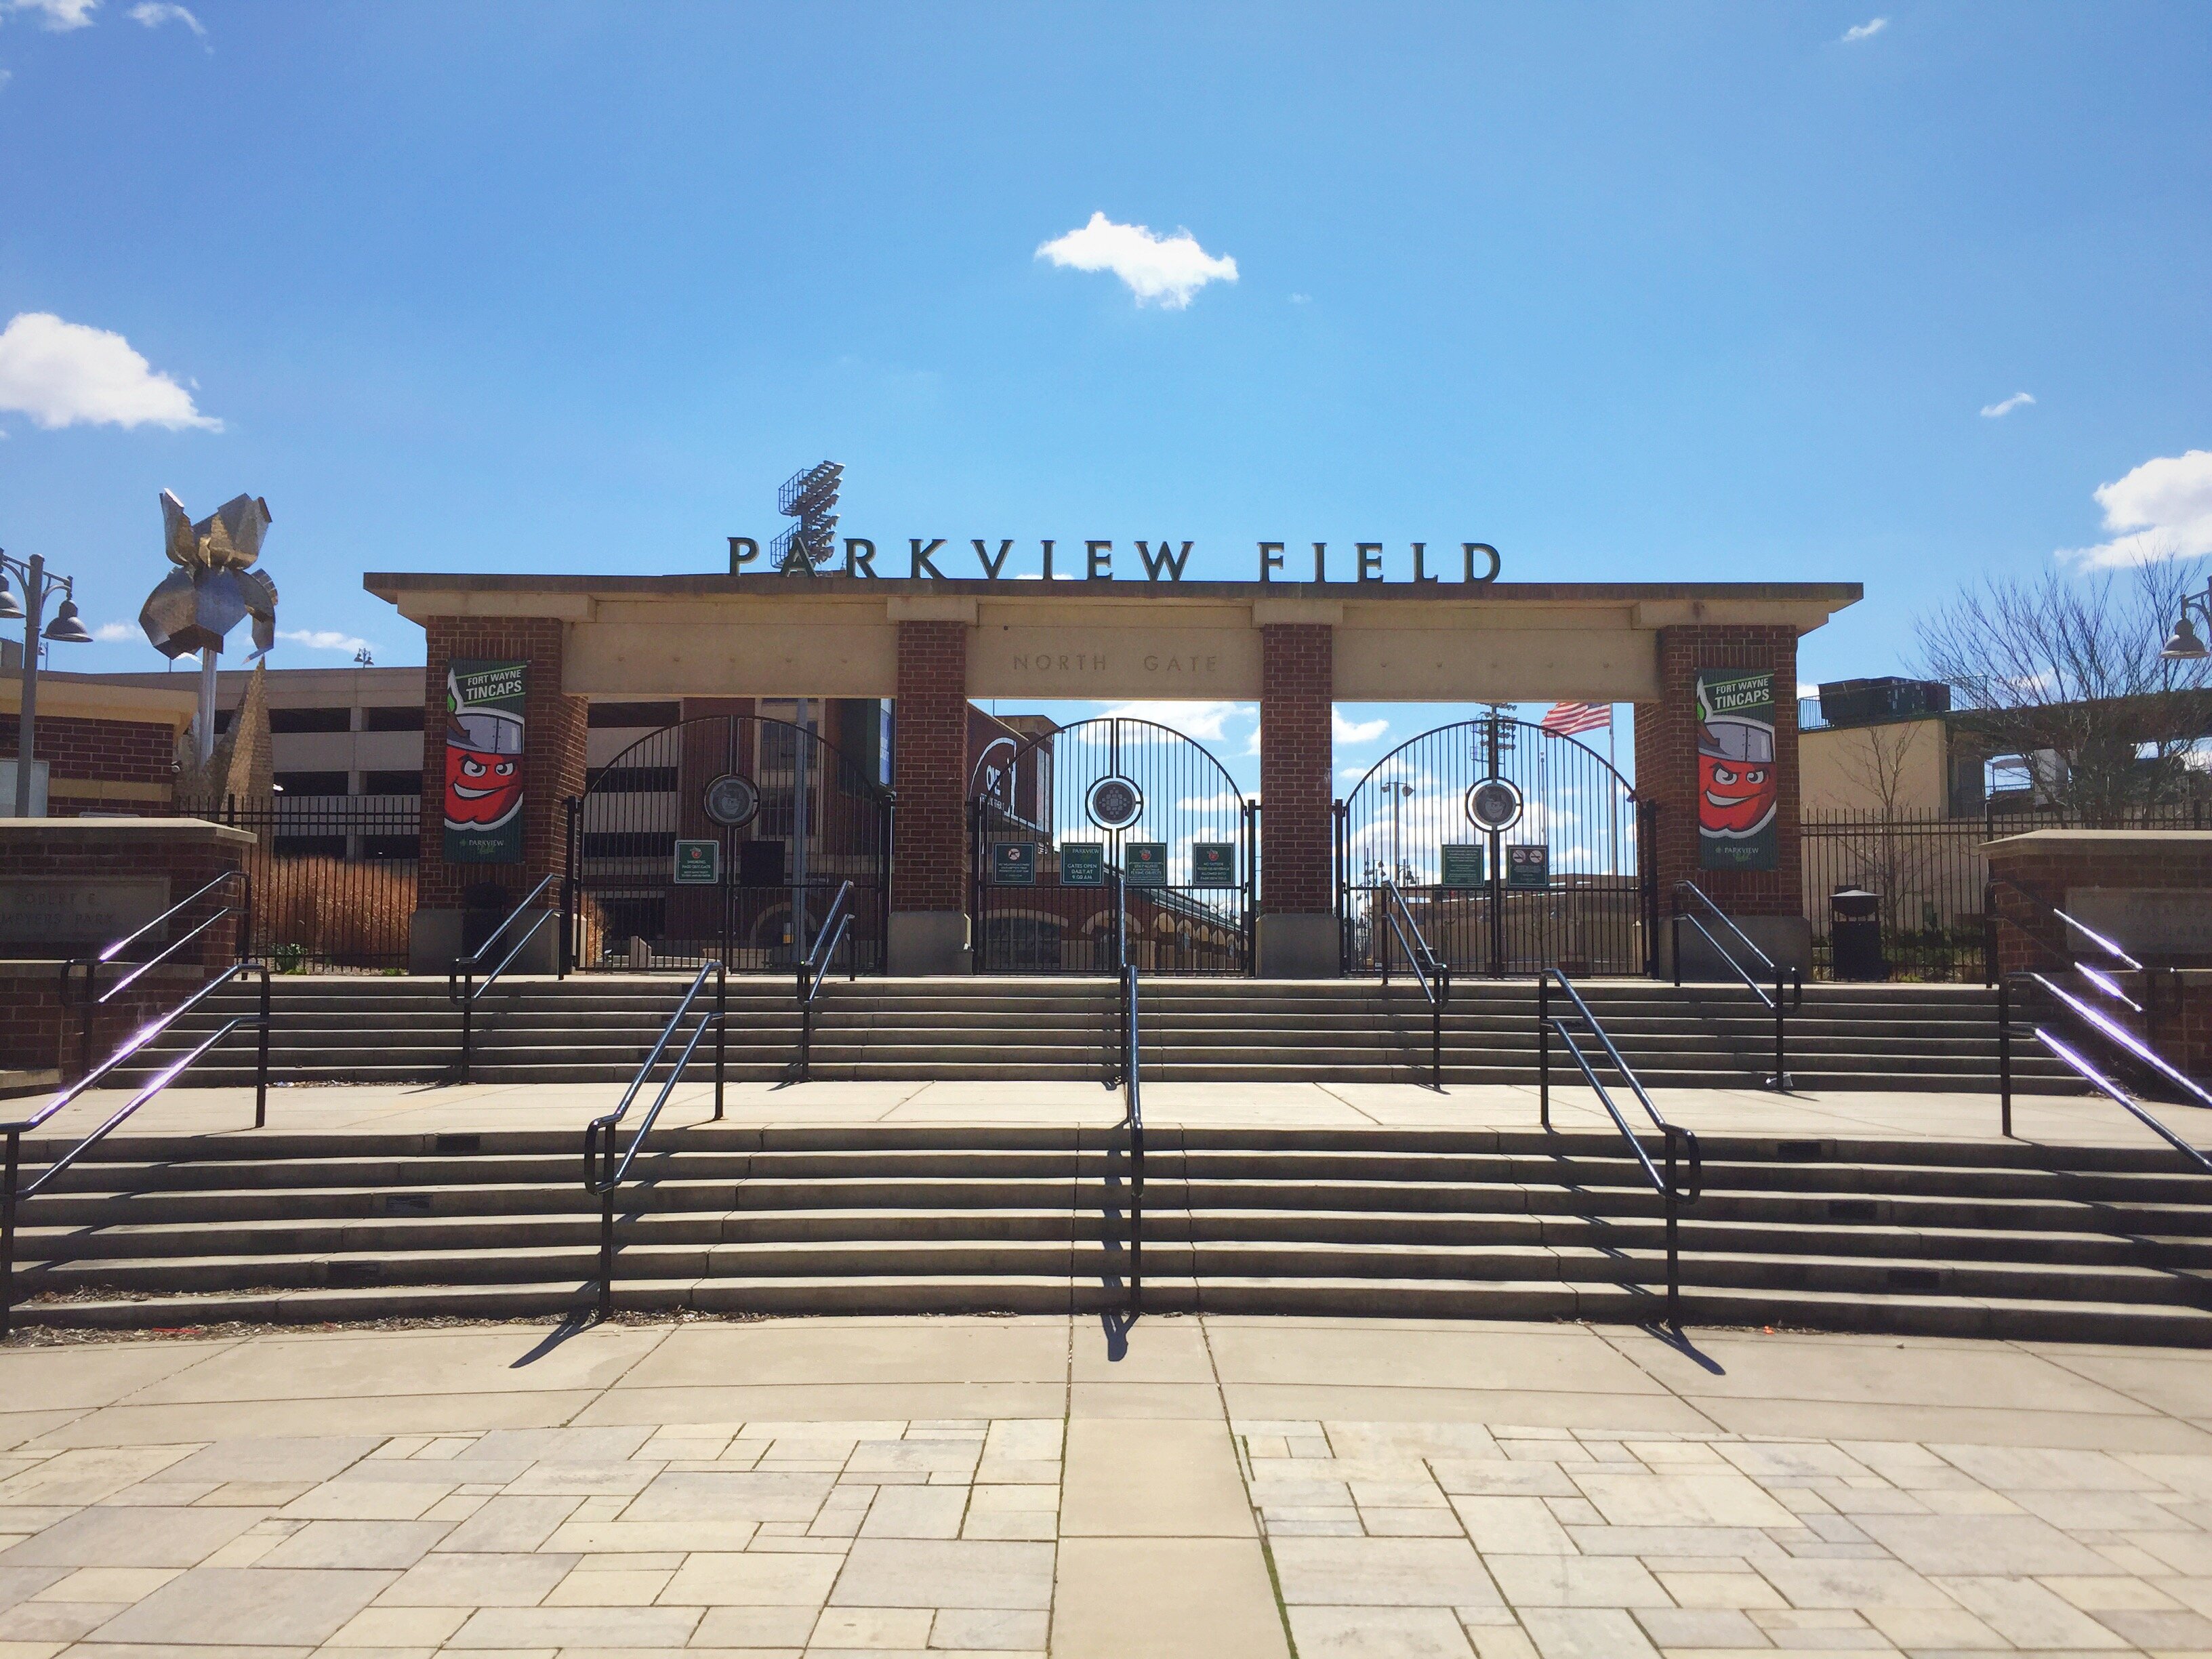 Parkview Field is closed to the public as part of the COVID-19 shutdown.